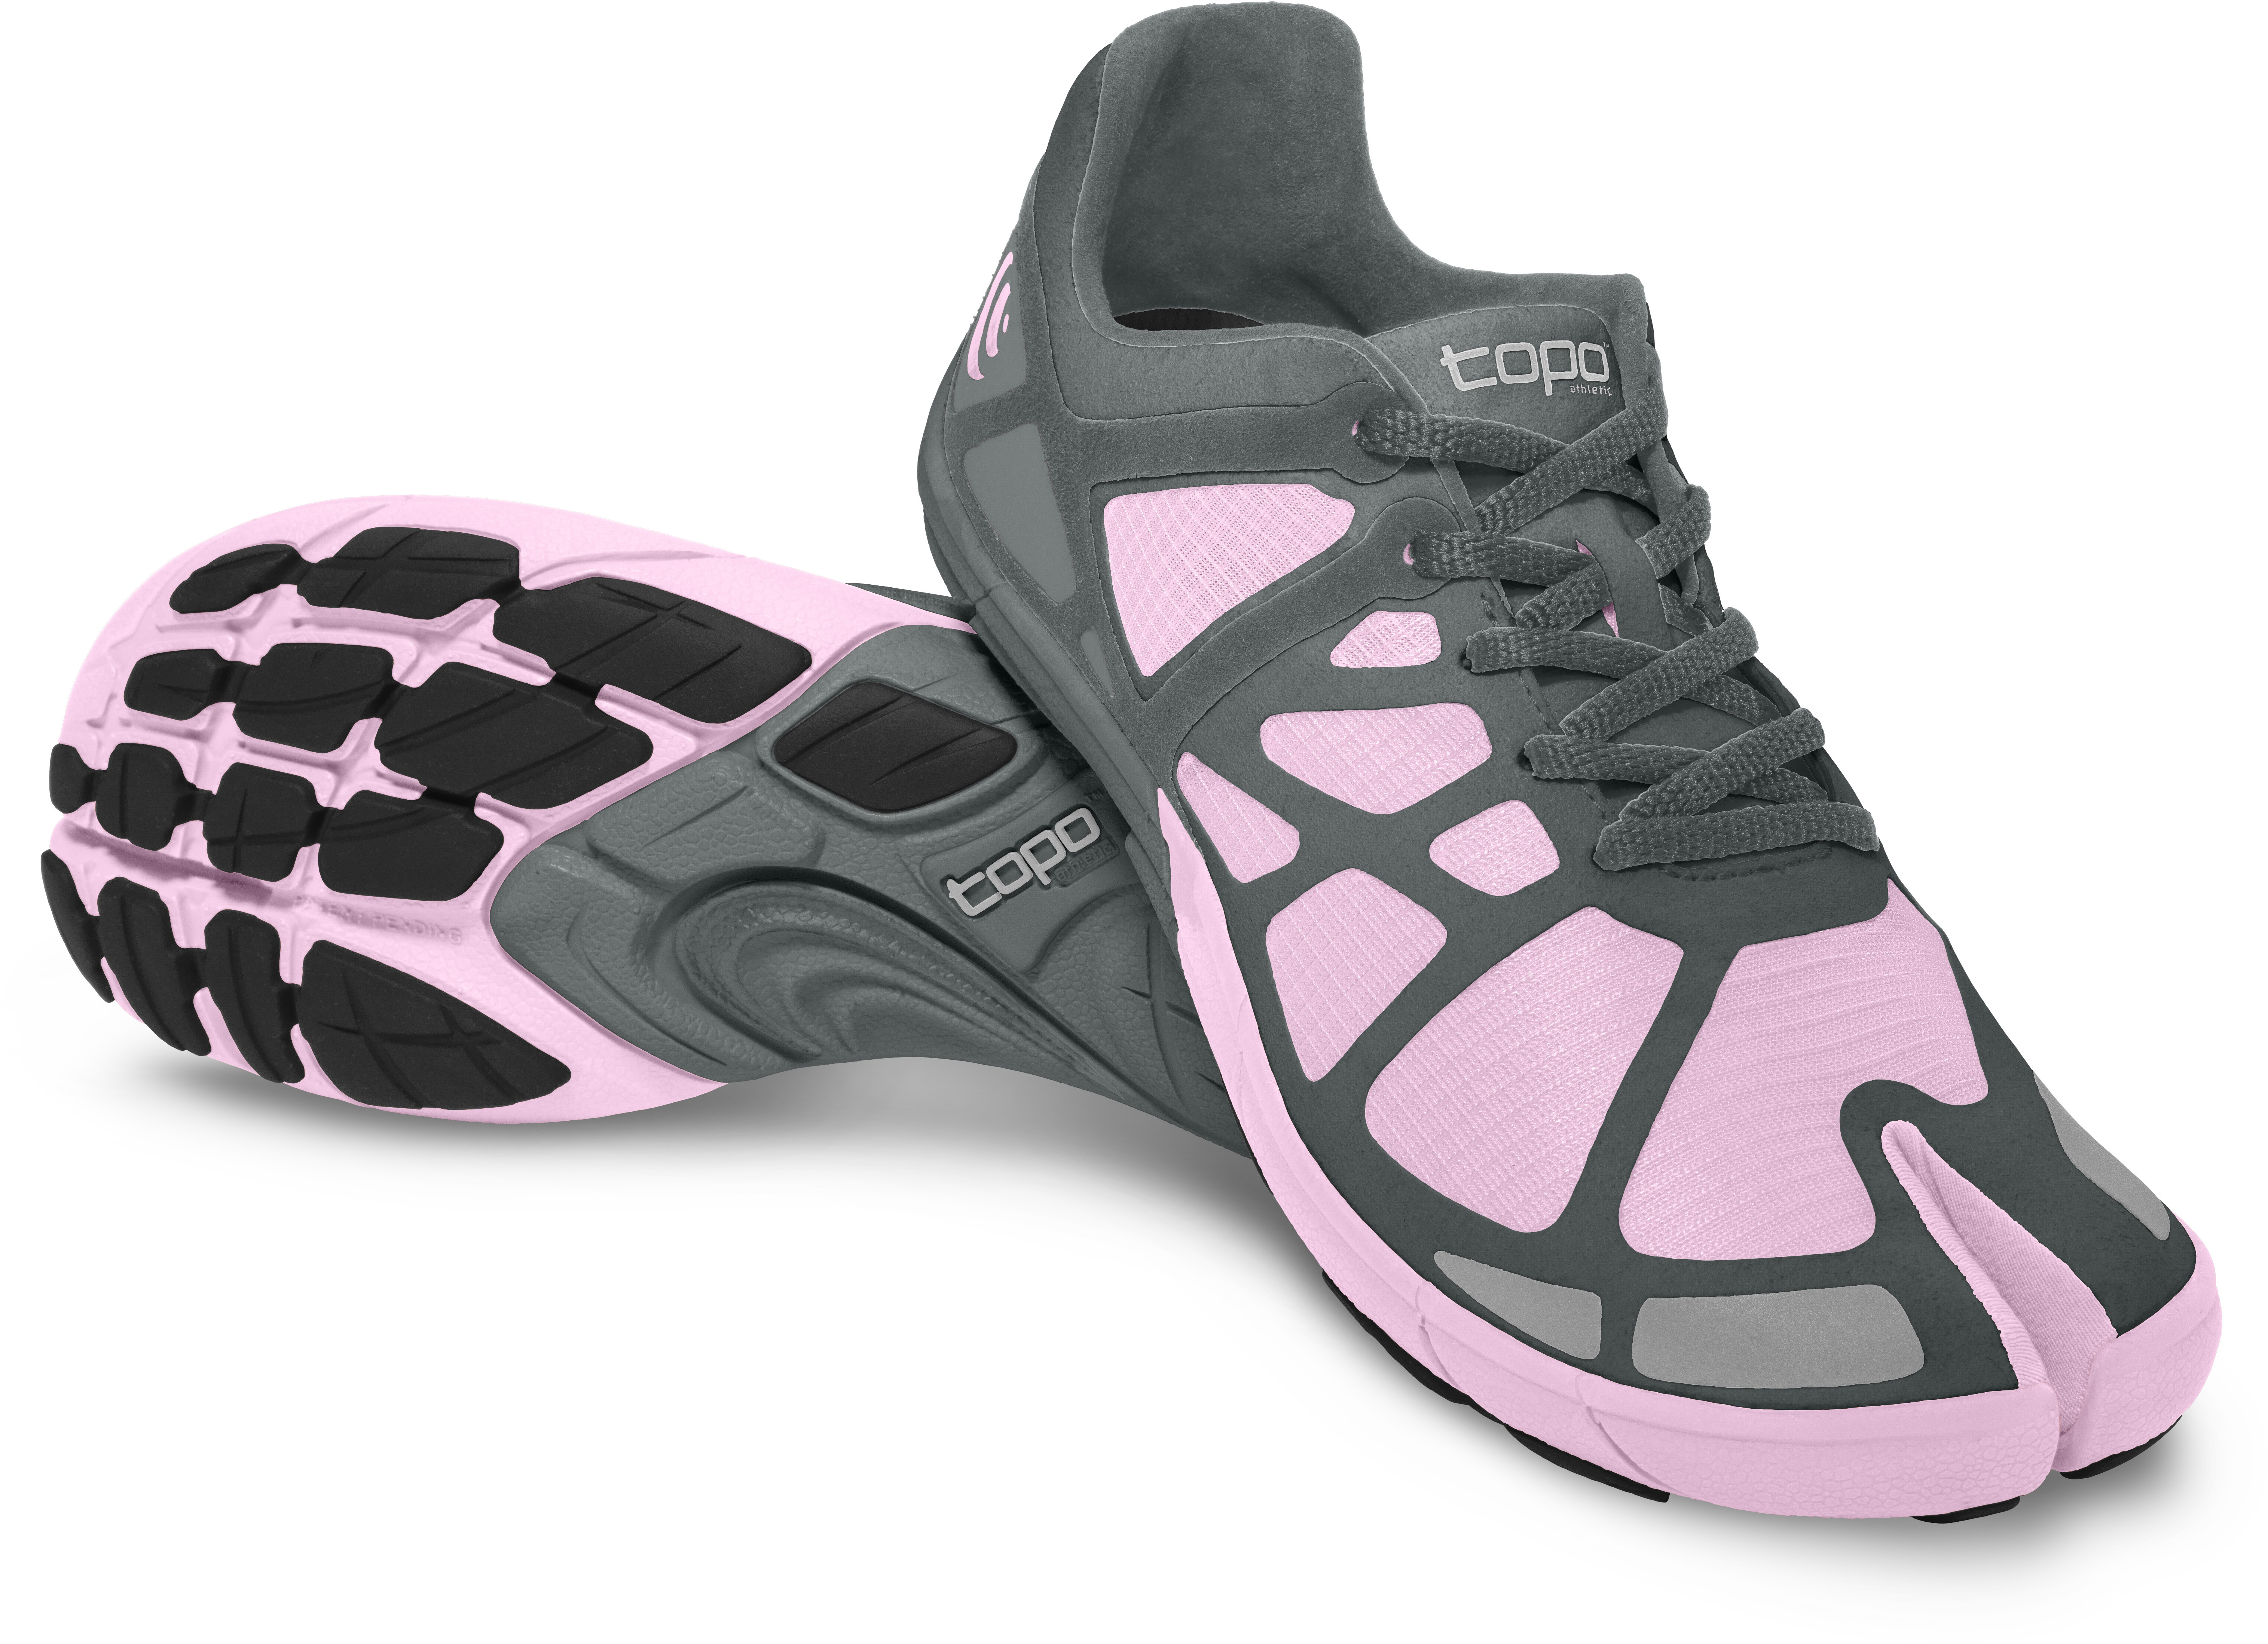 To boldly toe: ToPo Athletic split foot trainers are more science